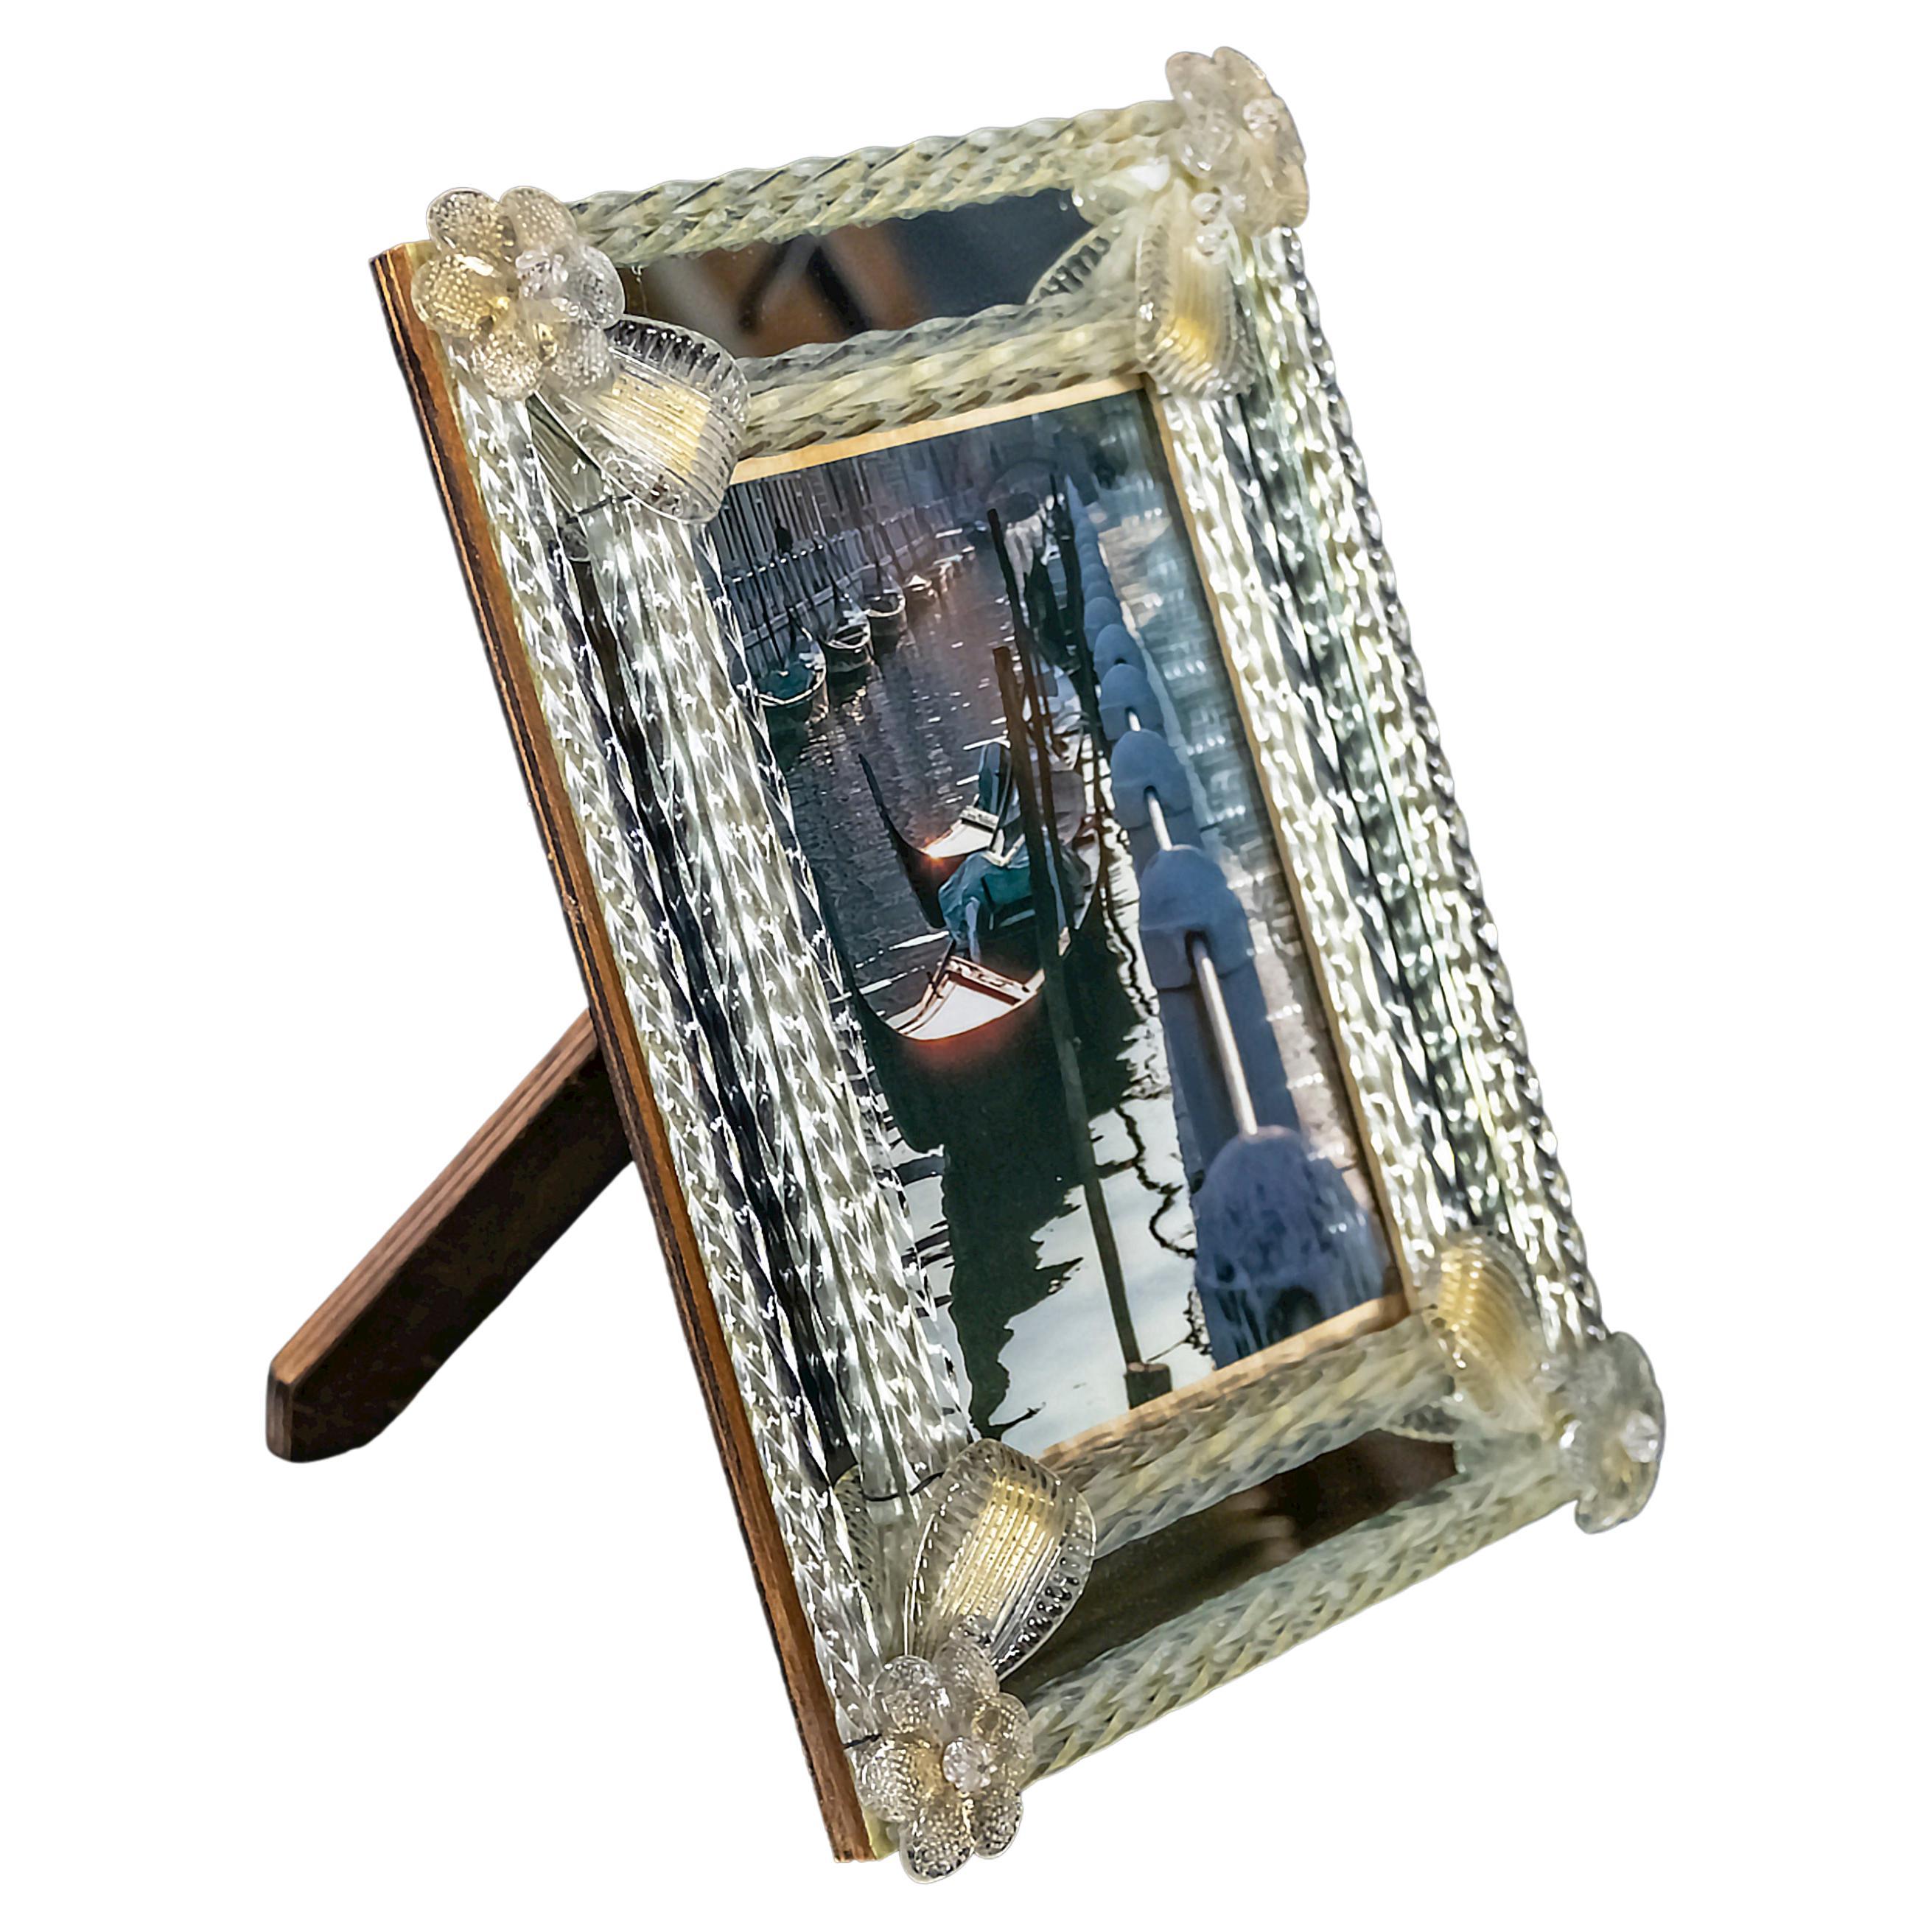 Italian Venetian handmade Murano glass photo frame from 1950-60's.
The glass is handmade, transparent with gold dust inside.
The frame can be hanged on the wall or placed on the table.

